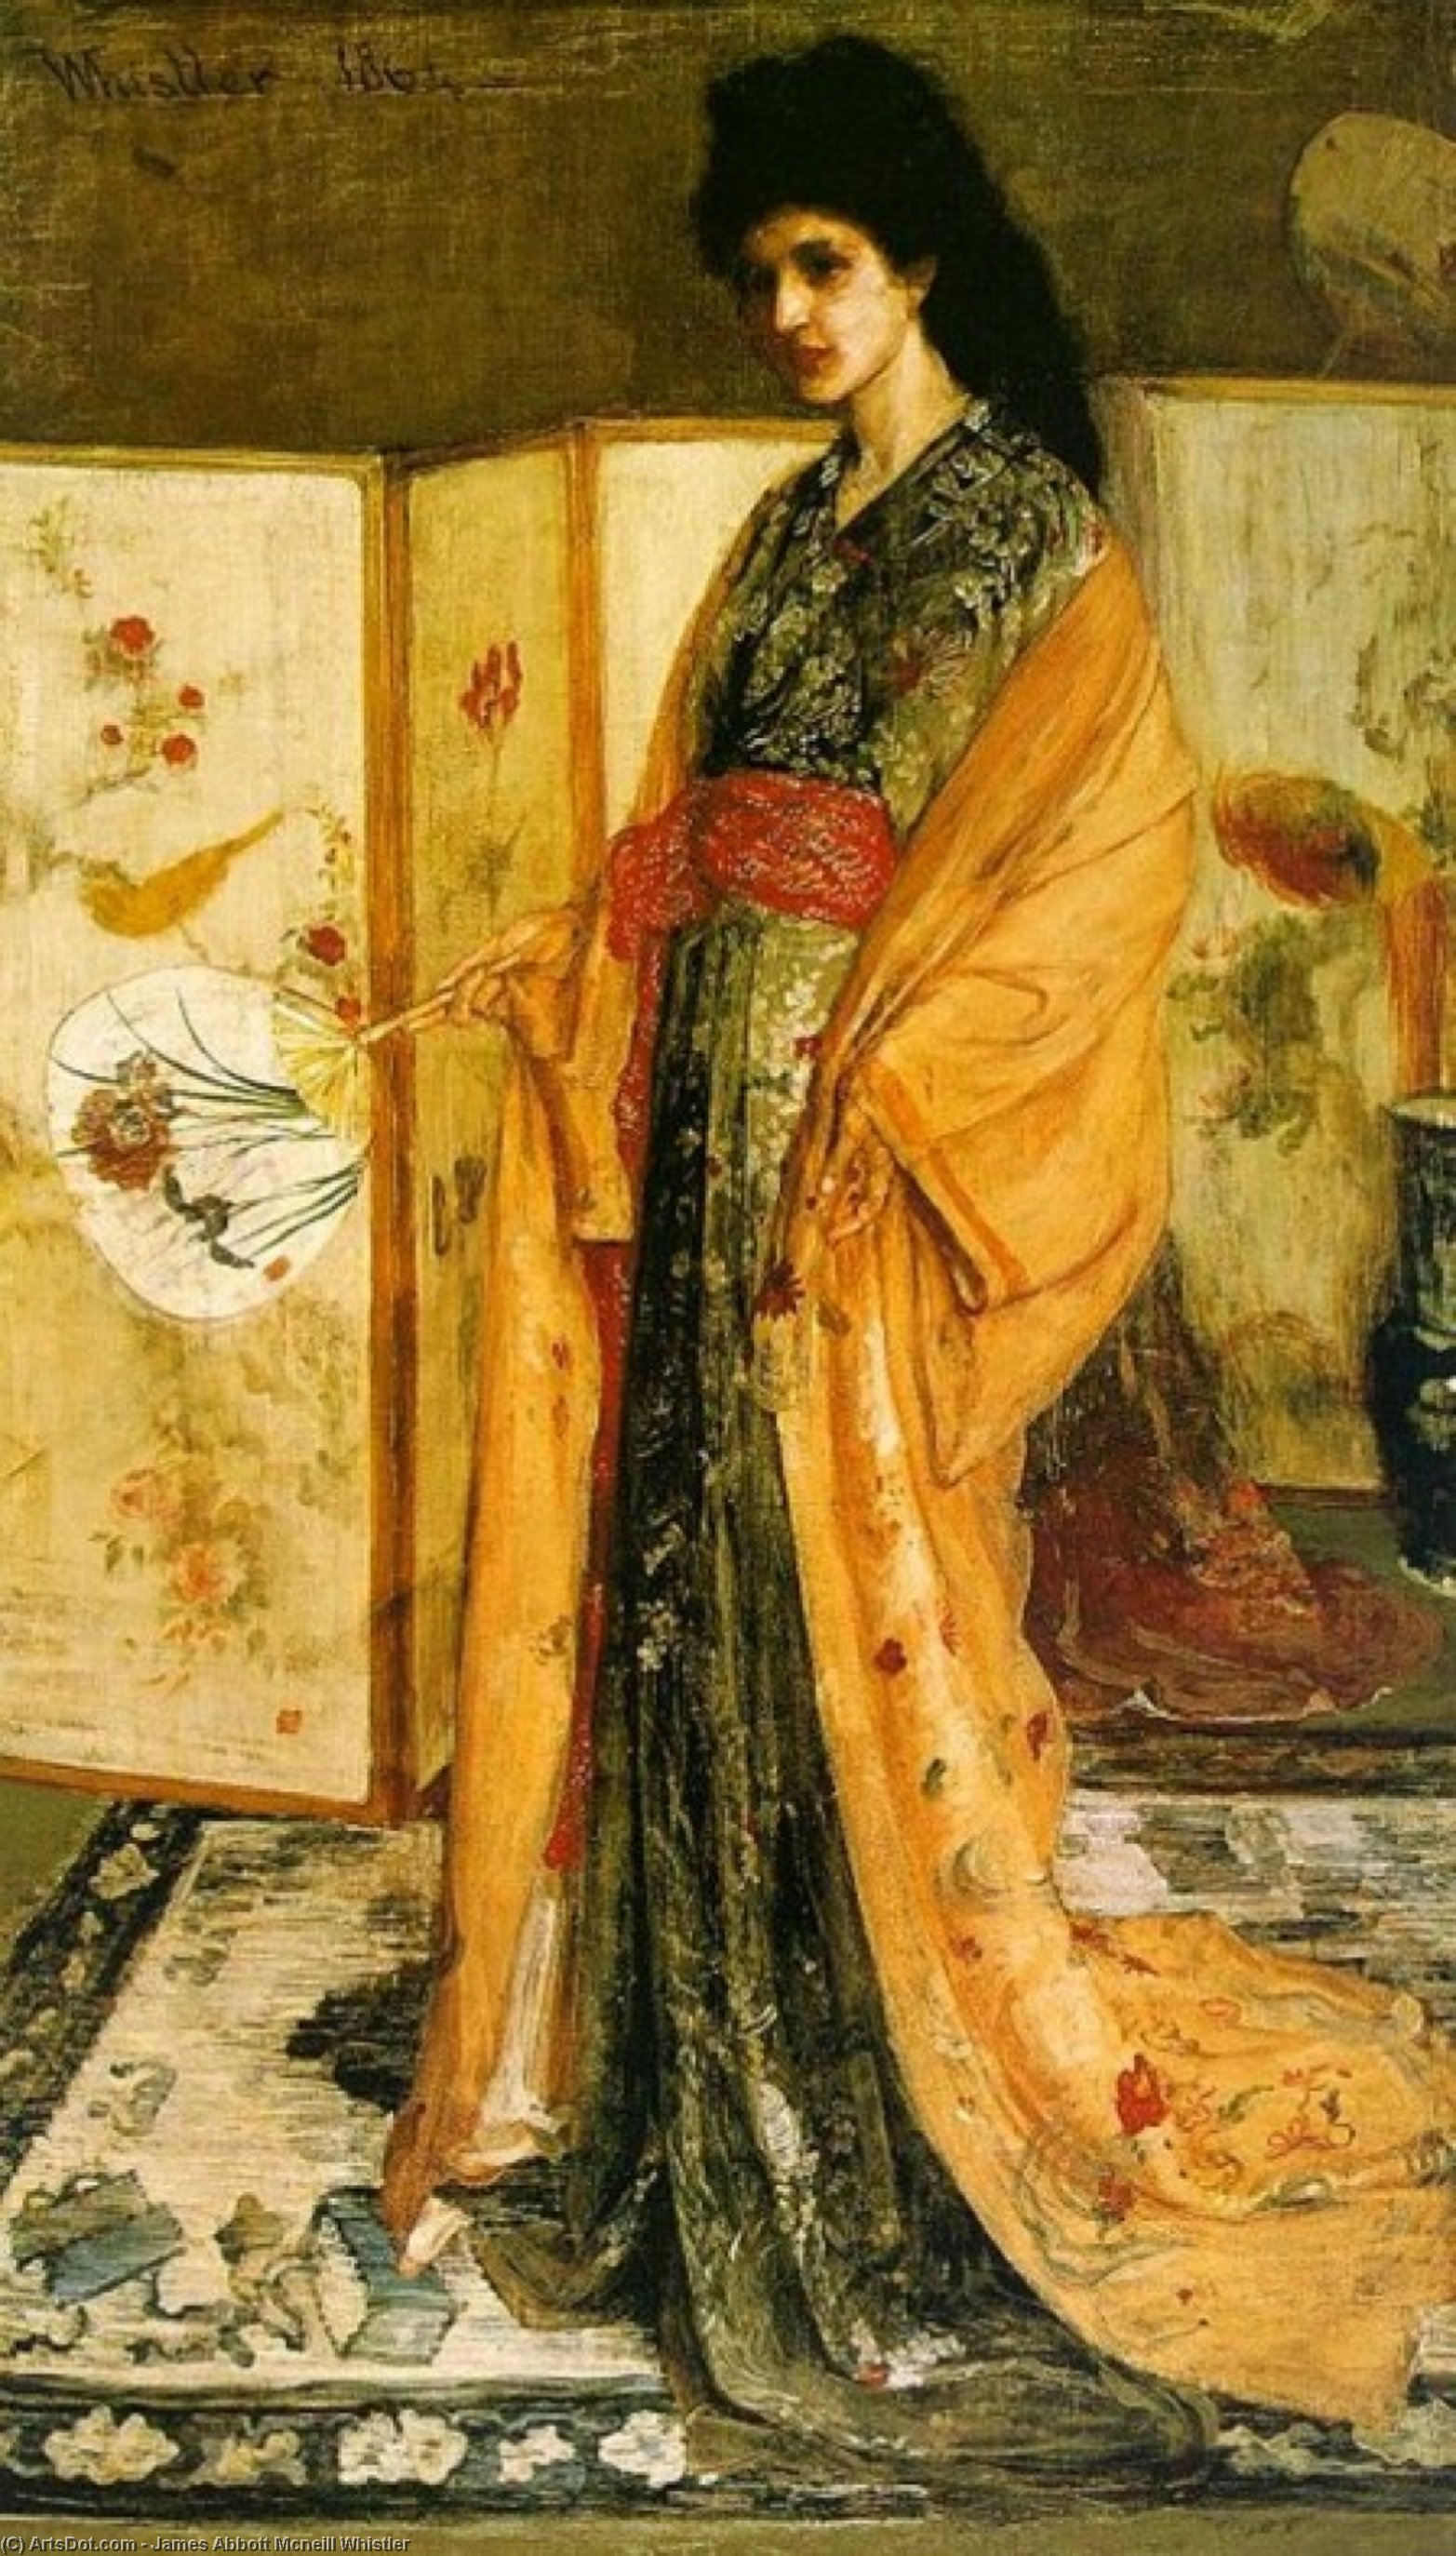 WikiOO.org - دایره المعارف هنرهای زیبا - نقاشی، آثار هنری James Abbott Mcneill Whistler - Rose and Silver. The Princess from the Land of Porcelain